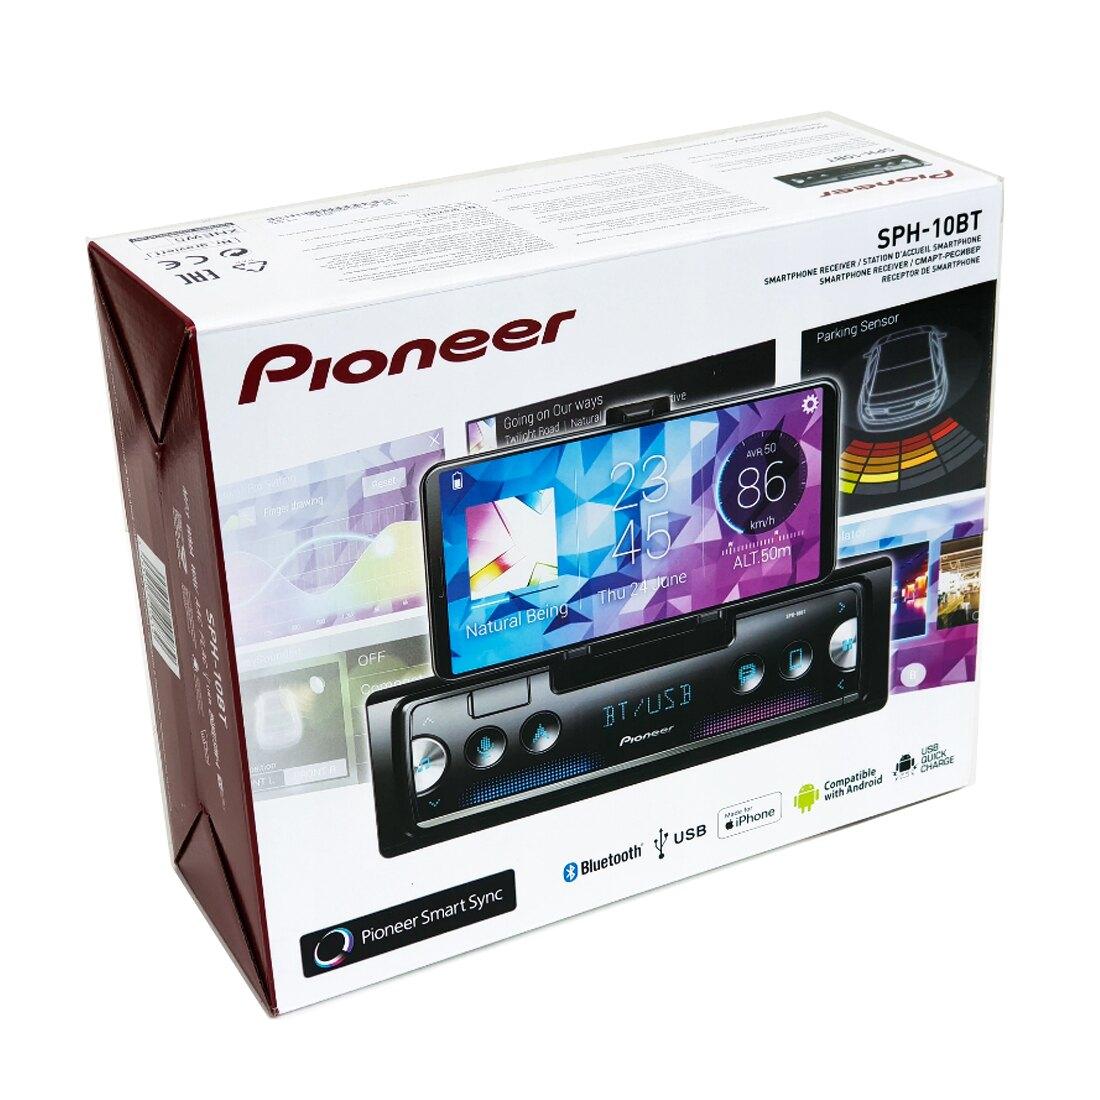 Selected image for PIONEER Auto radio SPH-10BT